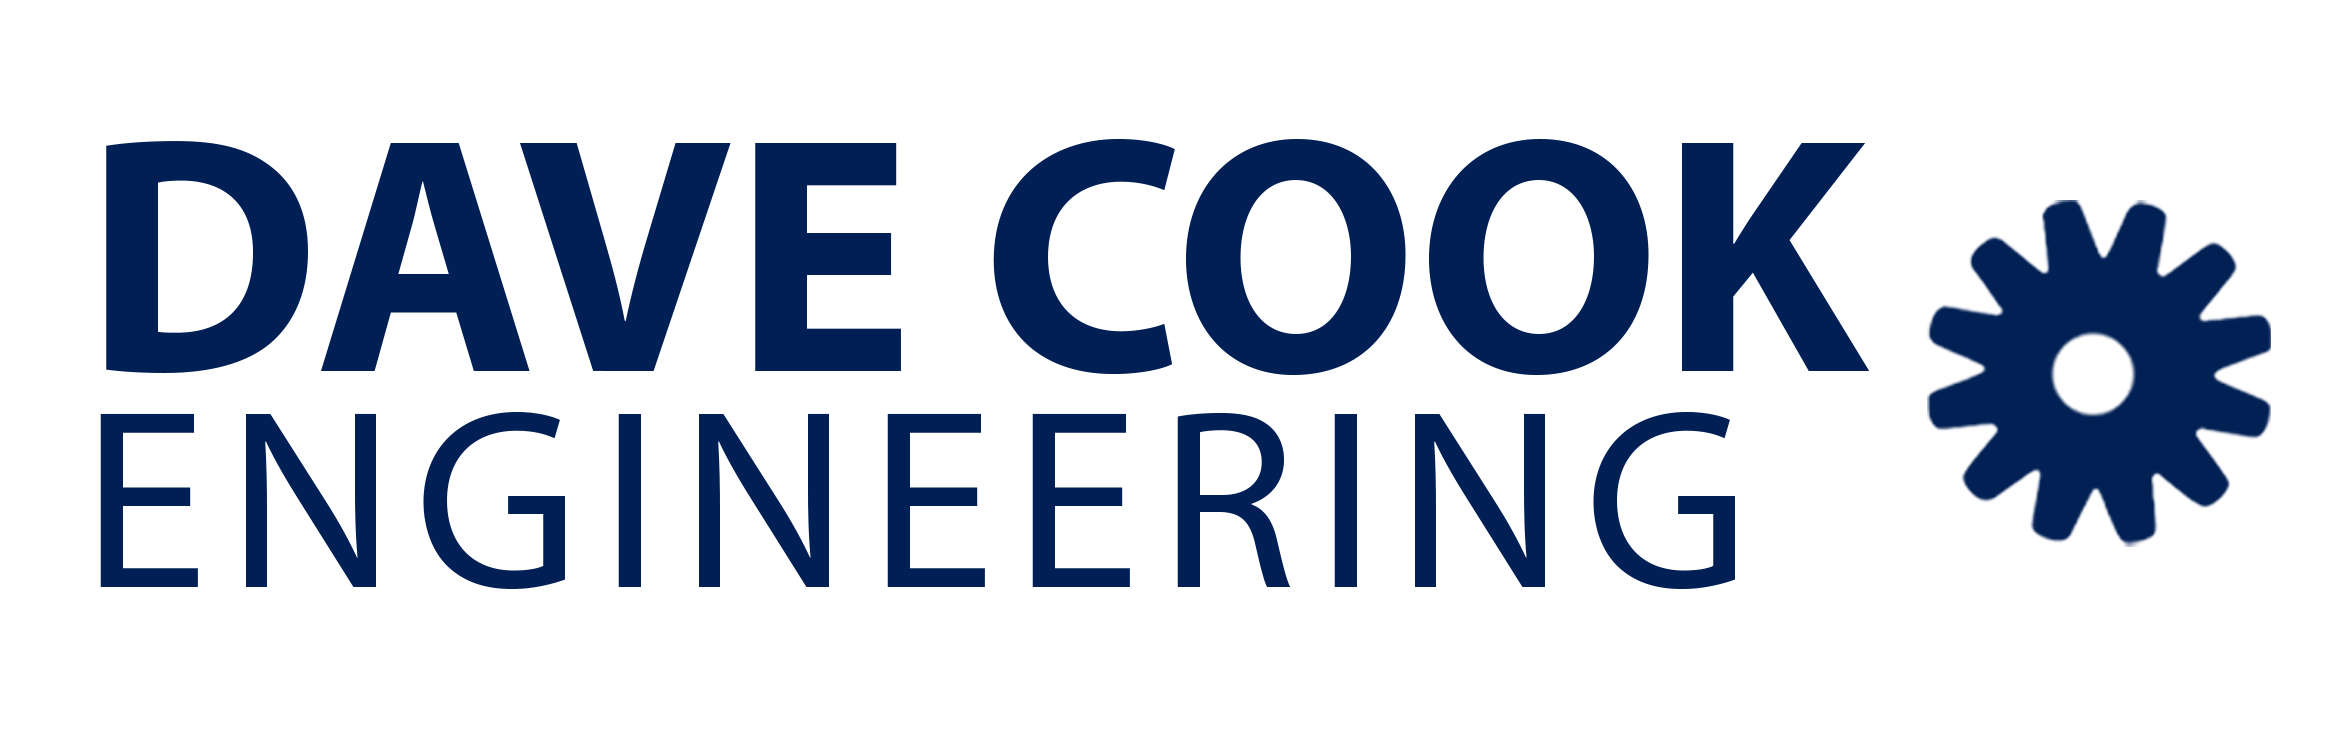 Dave Cook Engineering